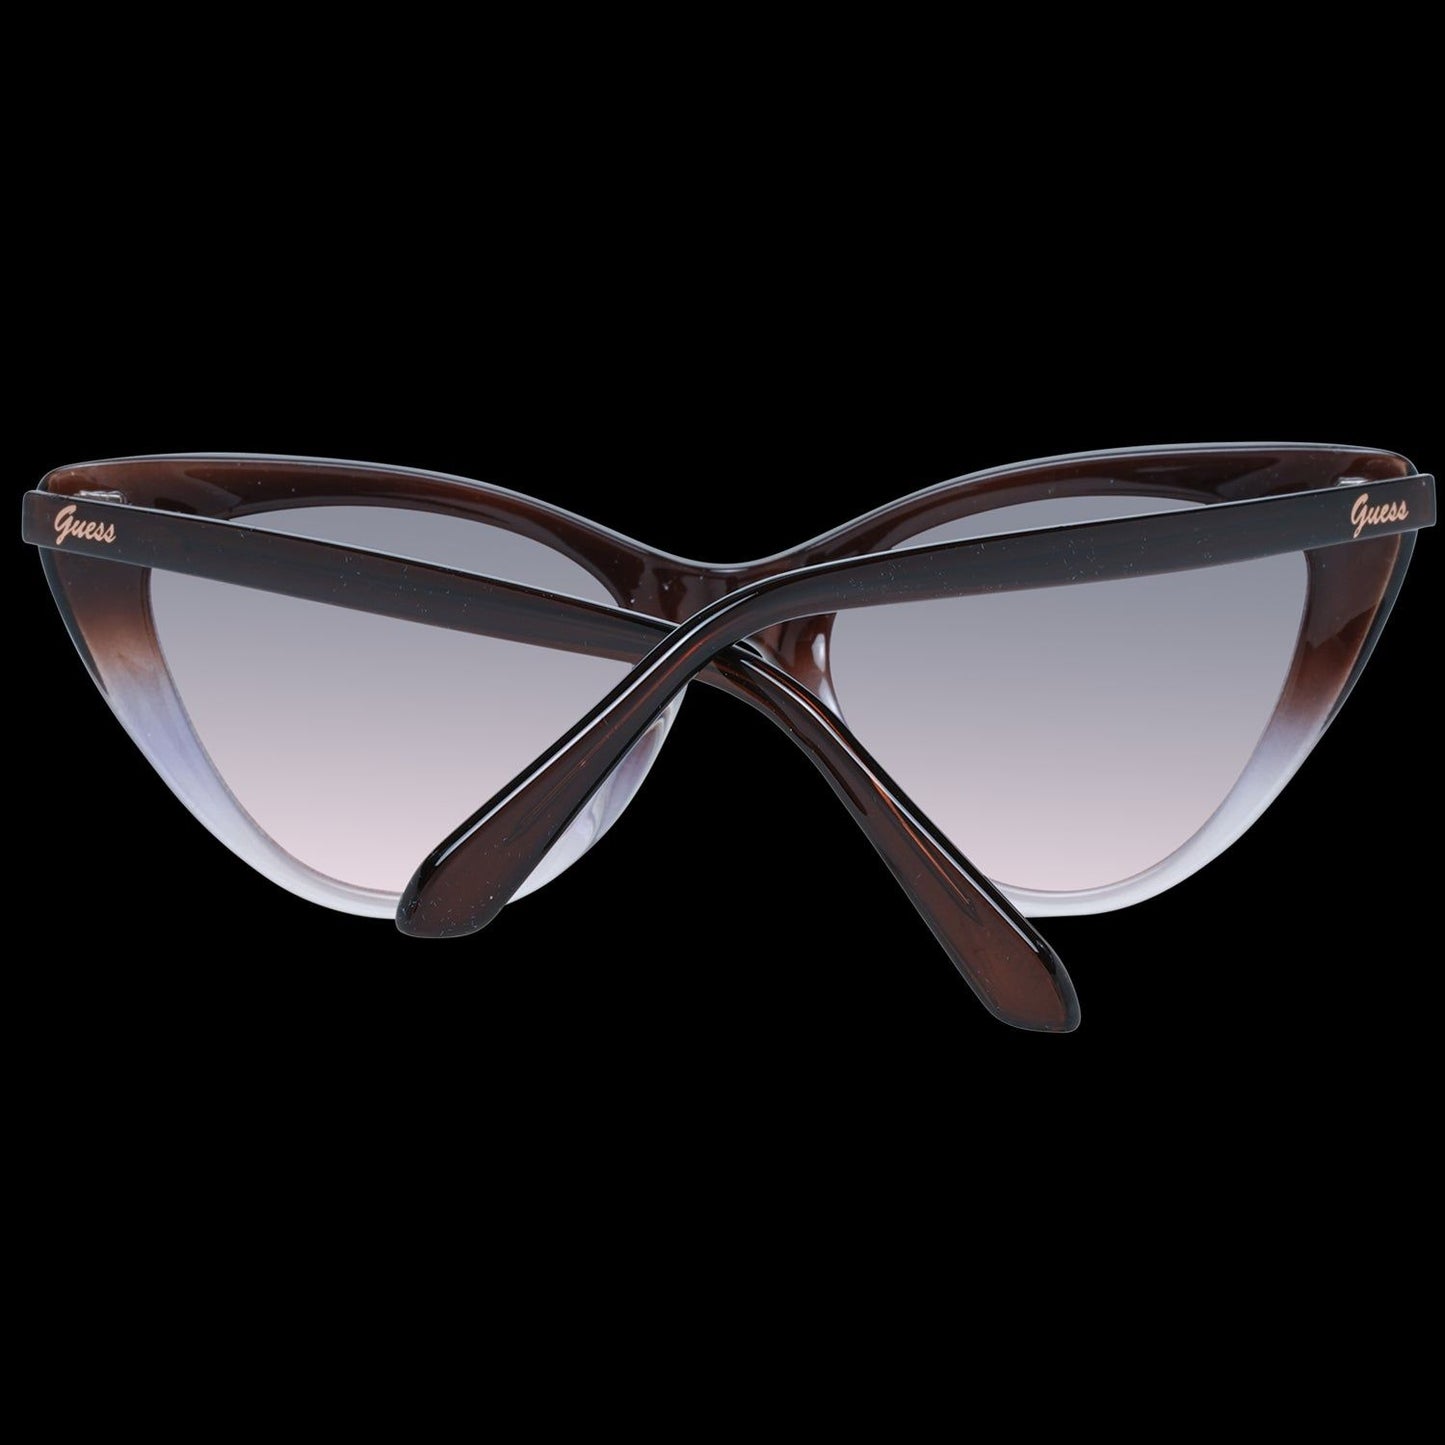 GUESS SUNGLASSES GUESS SUNGLASSES ***SPECIAL PRICE*** SUNGLASSES & EYEWEAR guess-sunglasses-special-price